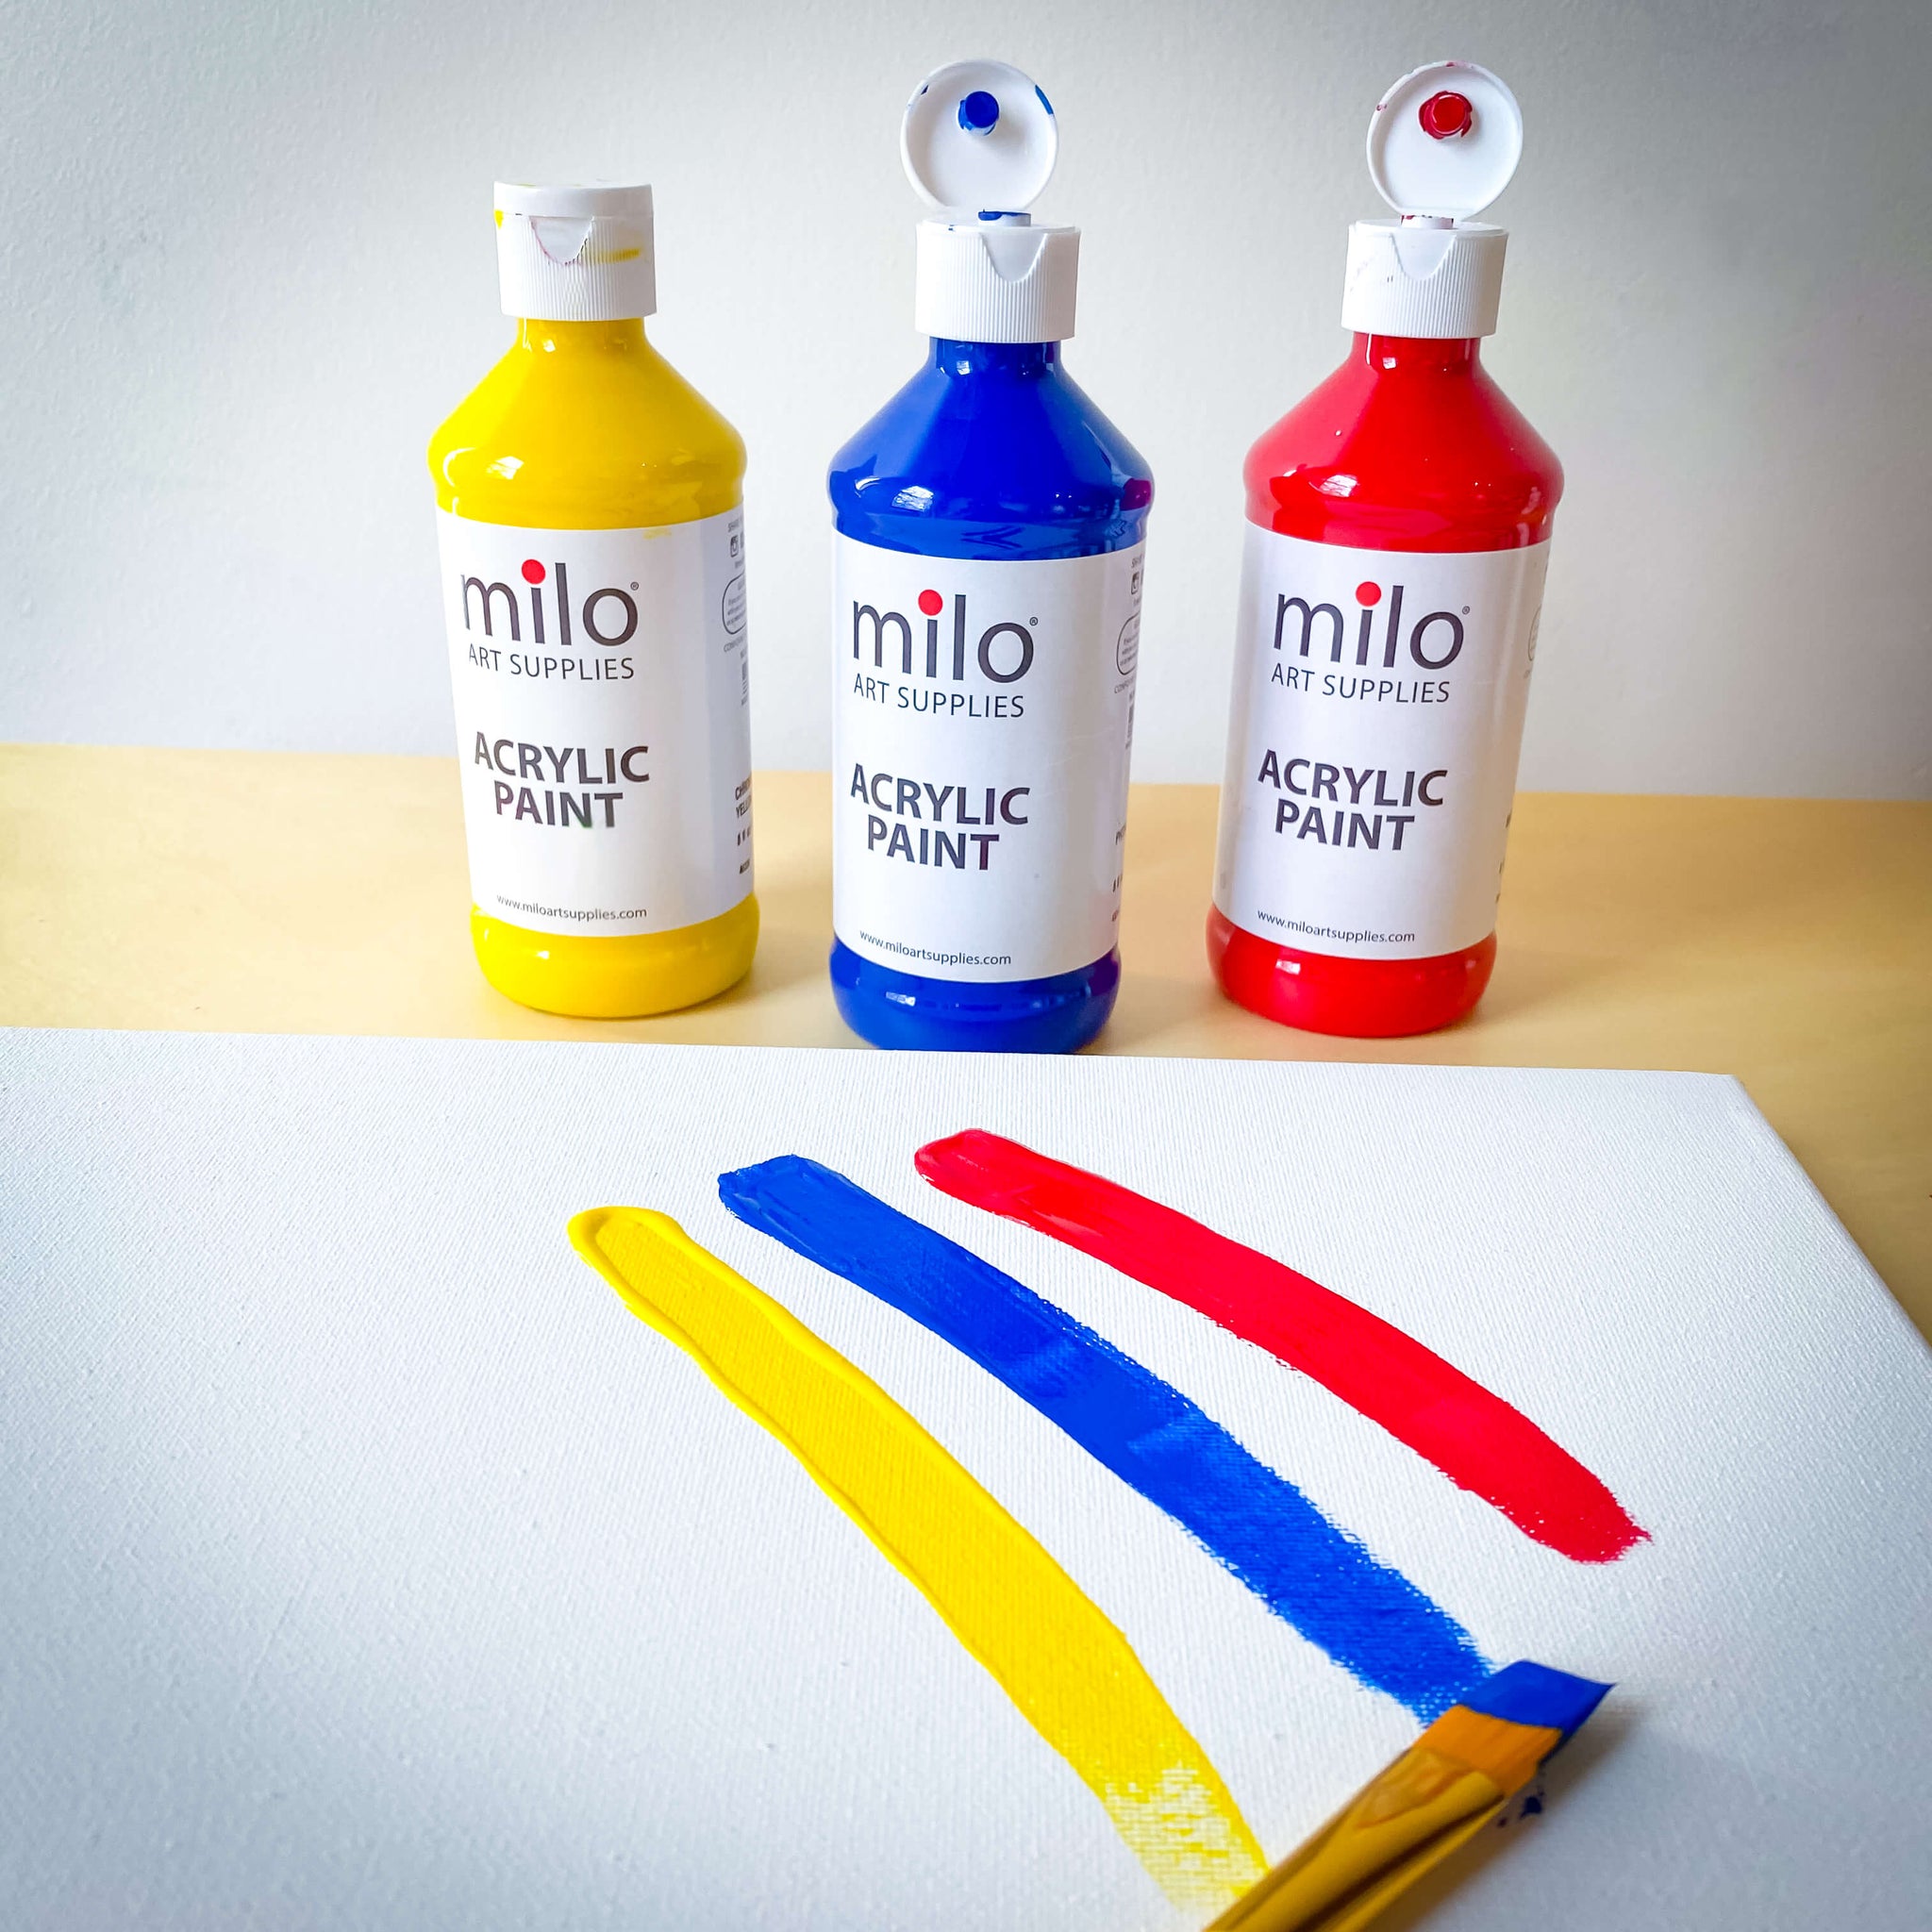 Milo Fluorescent Acrylic Paint Set of 6 Colors | 4 oz Bottles | Student Neon Colors Acrylics Painting Pack | Made in The USA | Non-Toxic Art & Craft